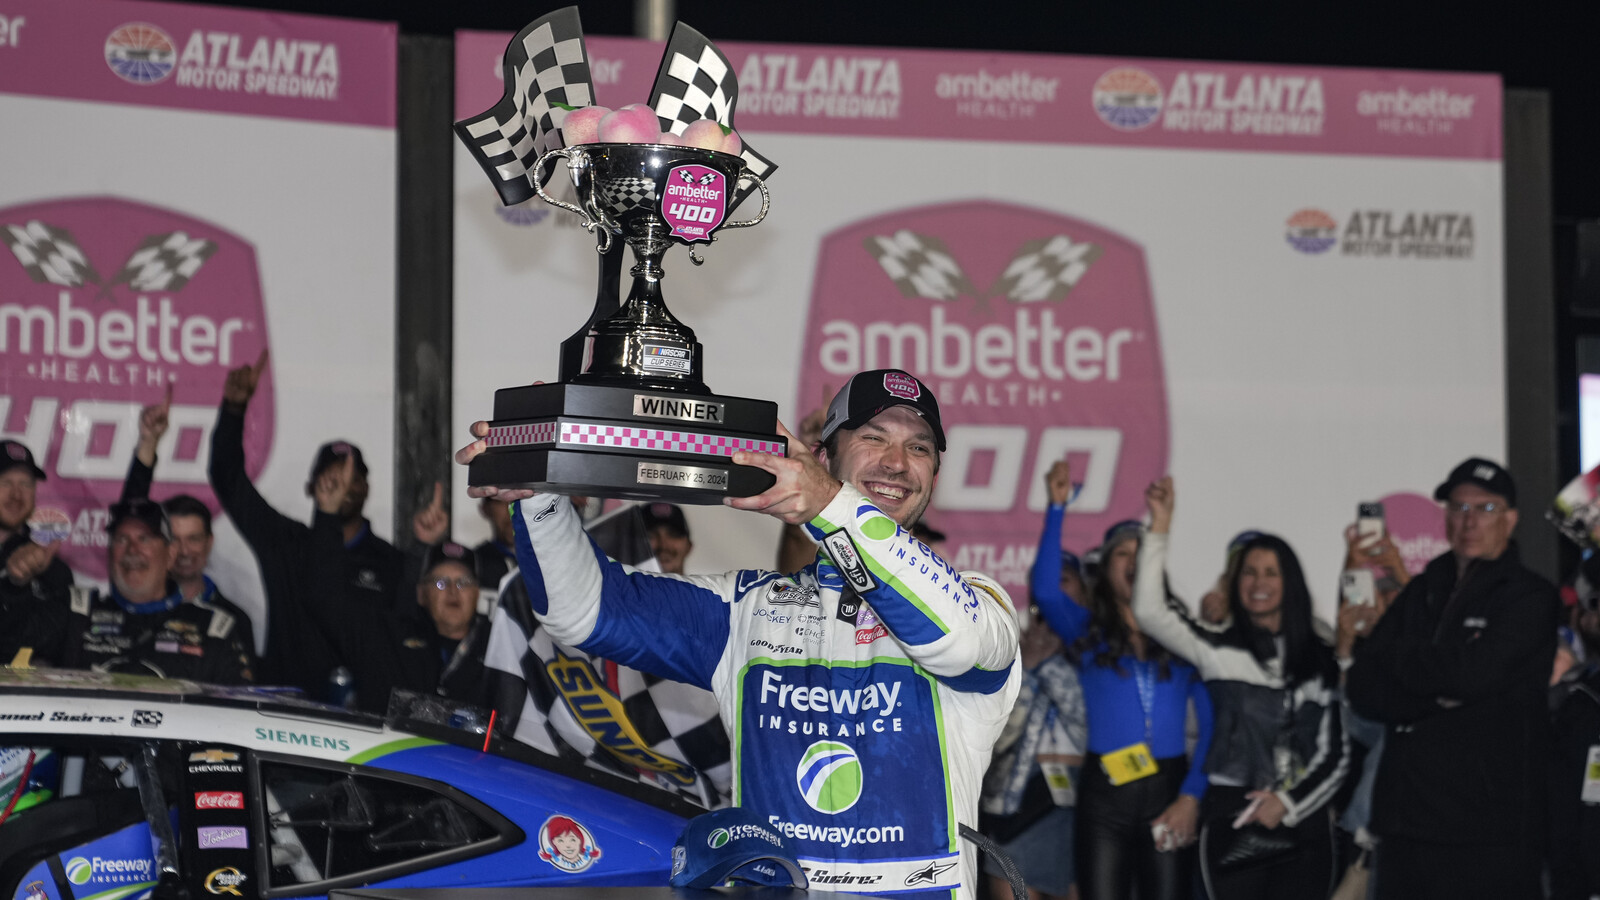 Suarez edges Blaney and Busch in three-wide finish for second Cup career victory at Atlanta